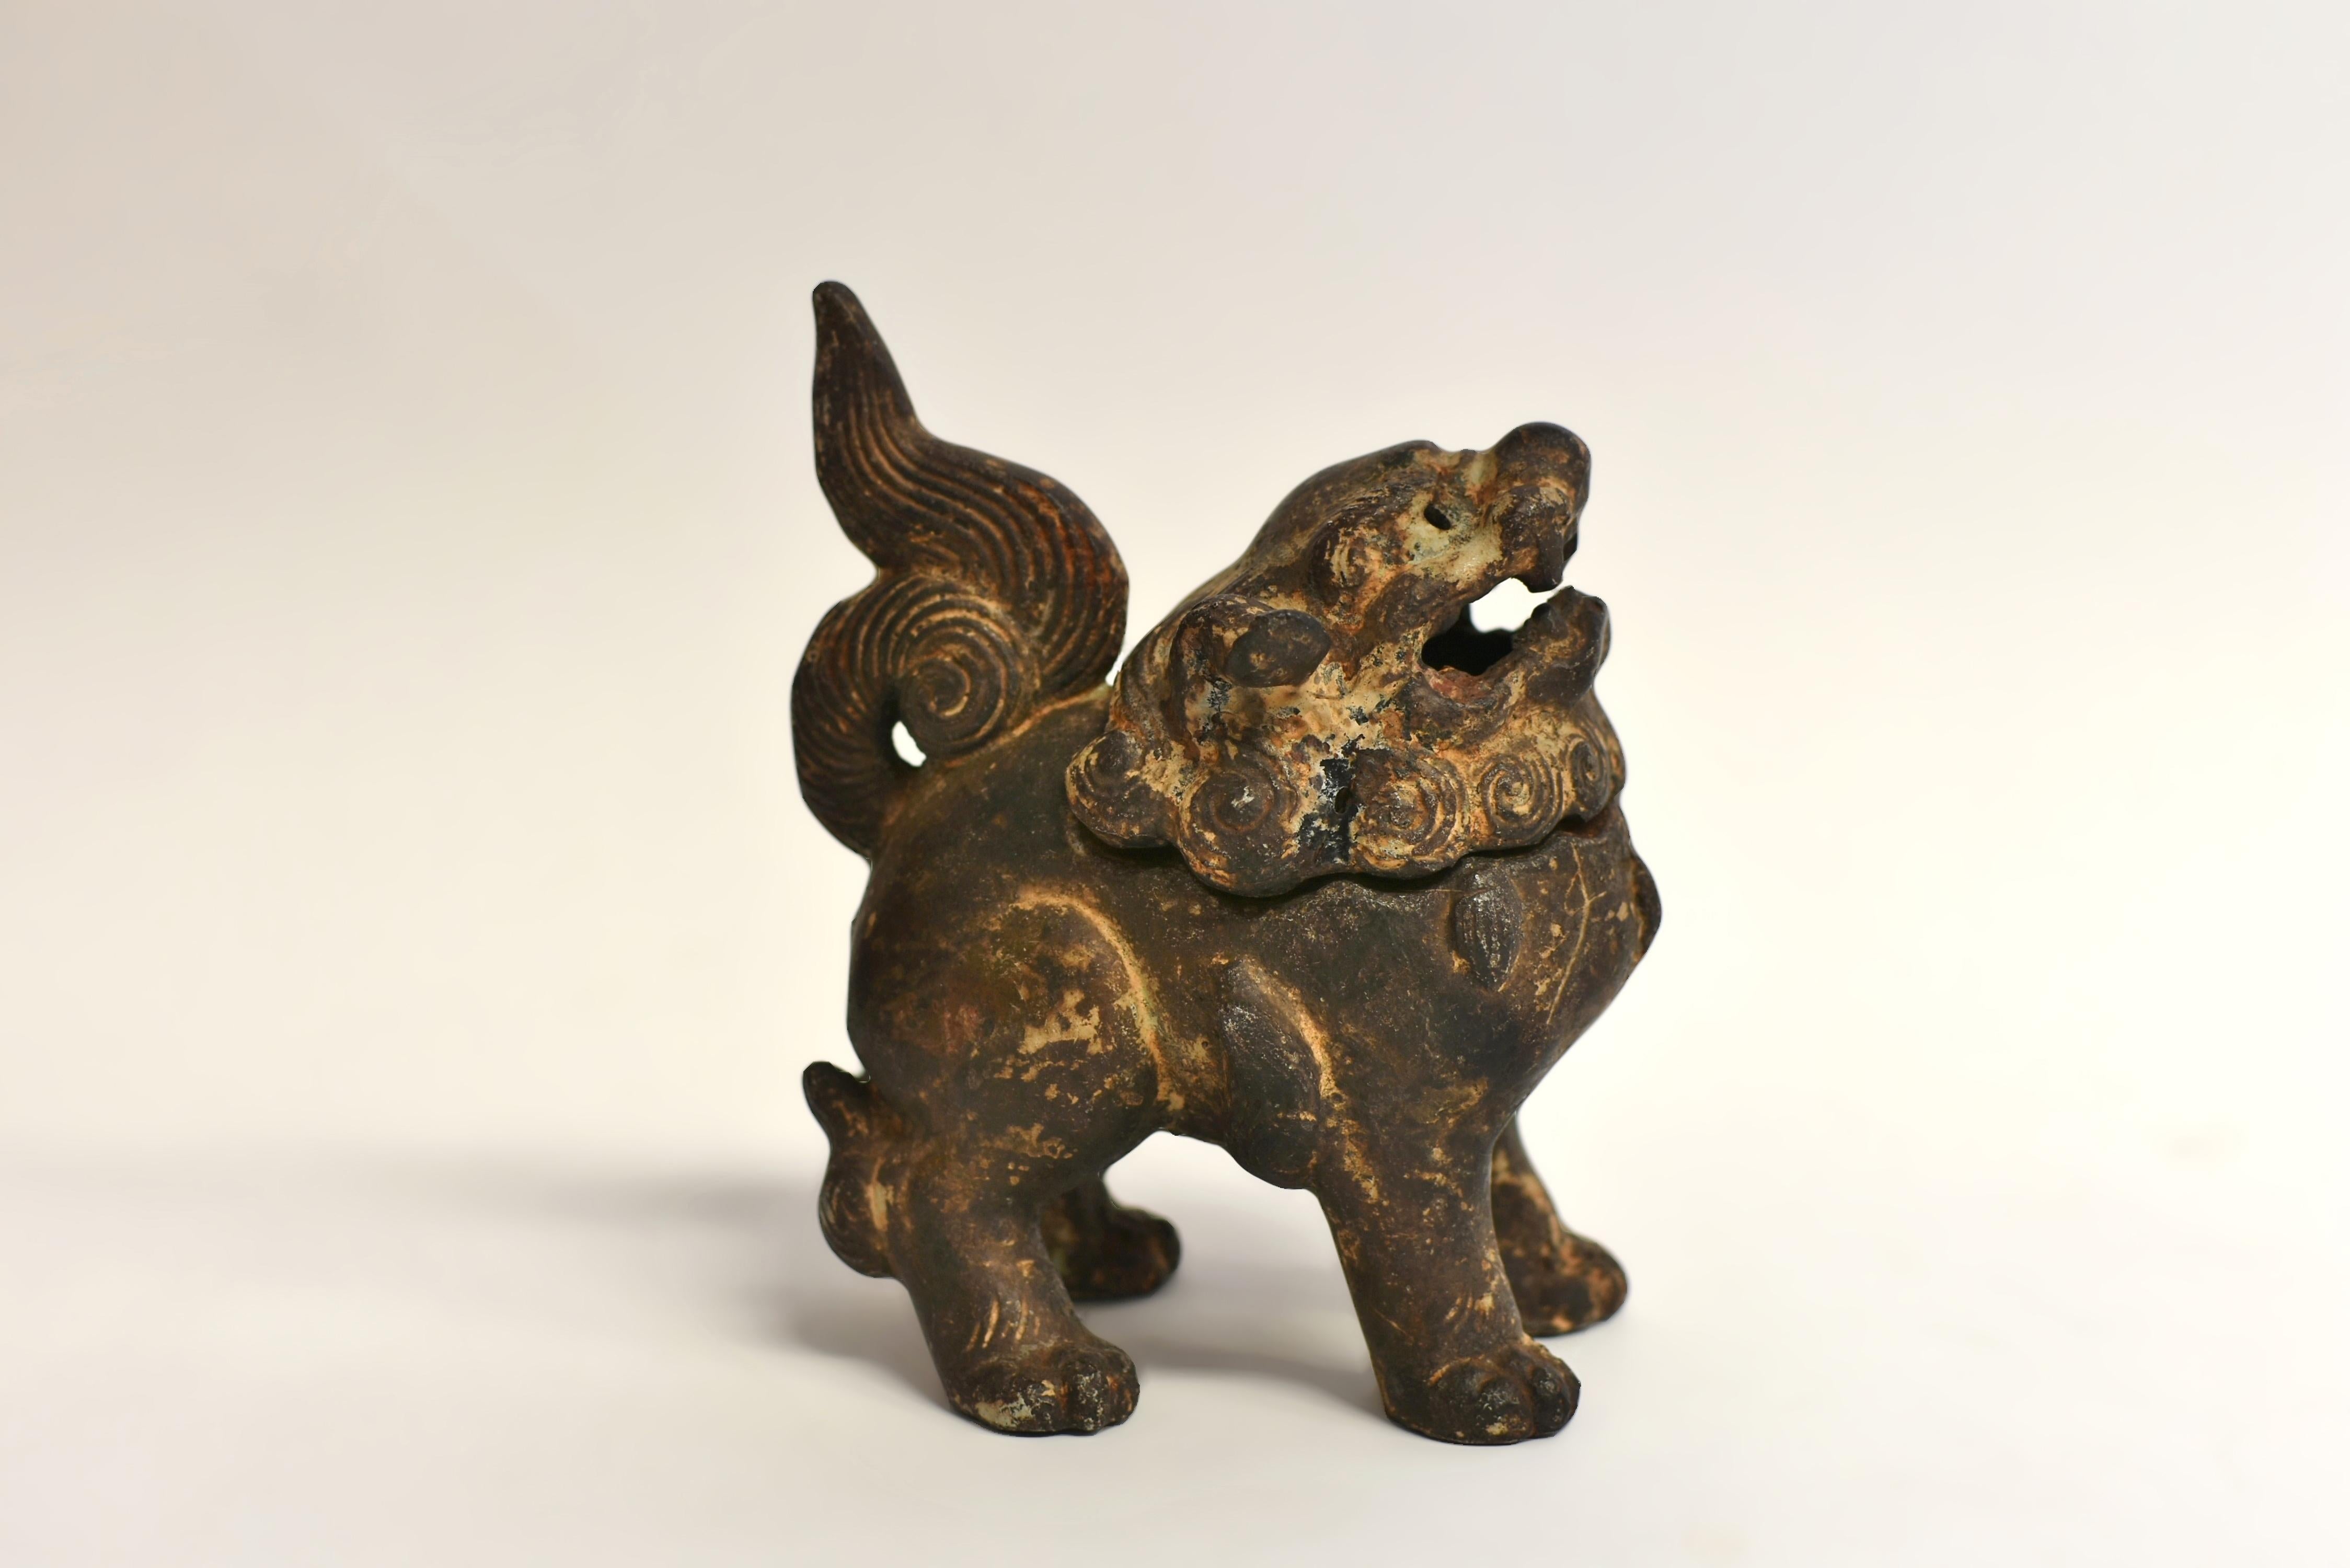 An original 19th century iron foo dog incense burner. Well-fashioned in a standing position, wearing a collar decorated with bells. The large head with open jaws and curly eyebrows, framed by a curled mane. The body masculine with all four legs